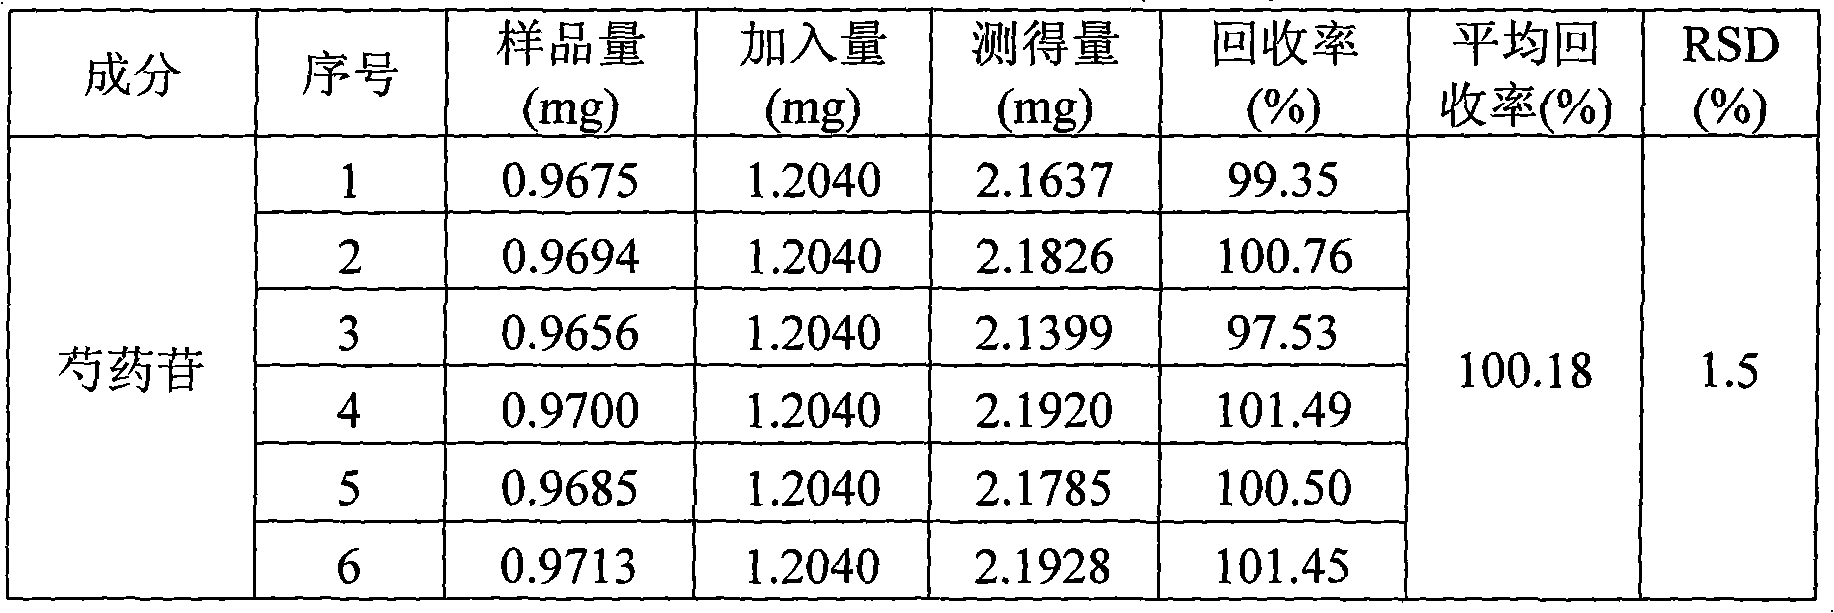 Content measuring method for four components in Chinese medicinal composition